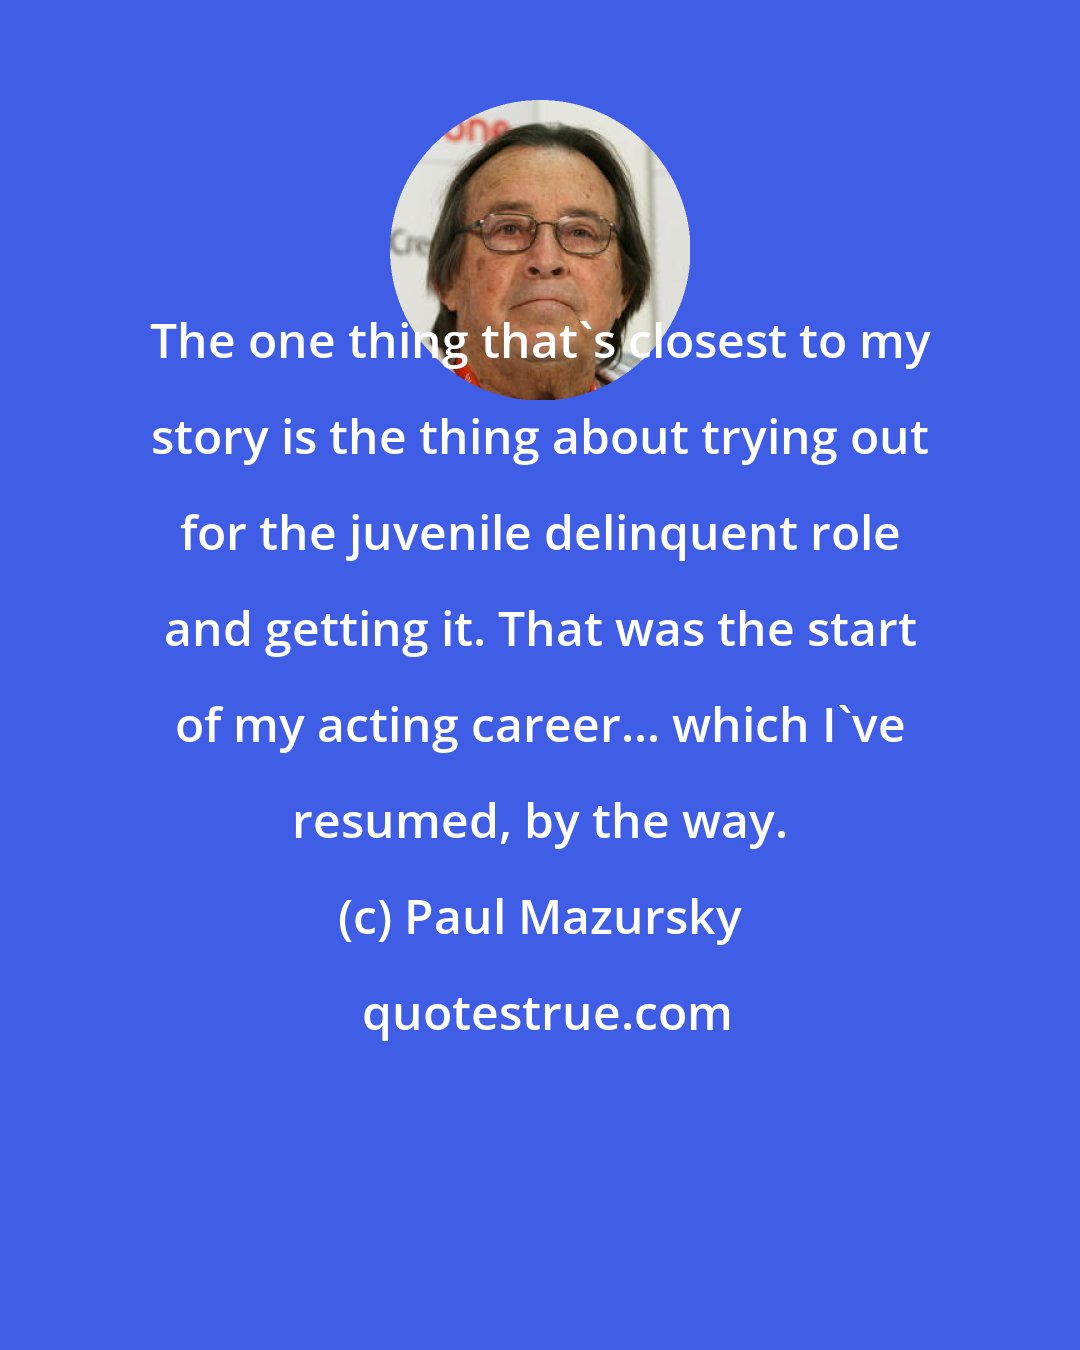 Paul Mazursky: The one thing that's closest to my story is the thing about trying out for the juvenile delinquent role and getting it. That was the start of my acting career... which I've resumed, by the way.